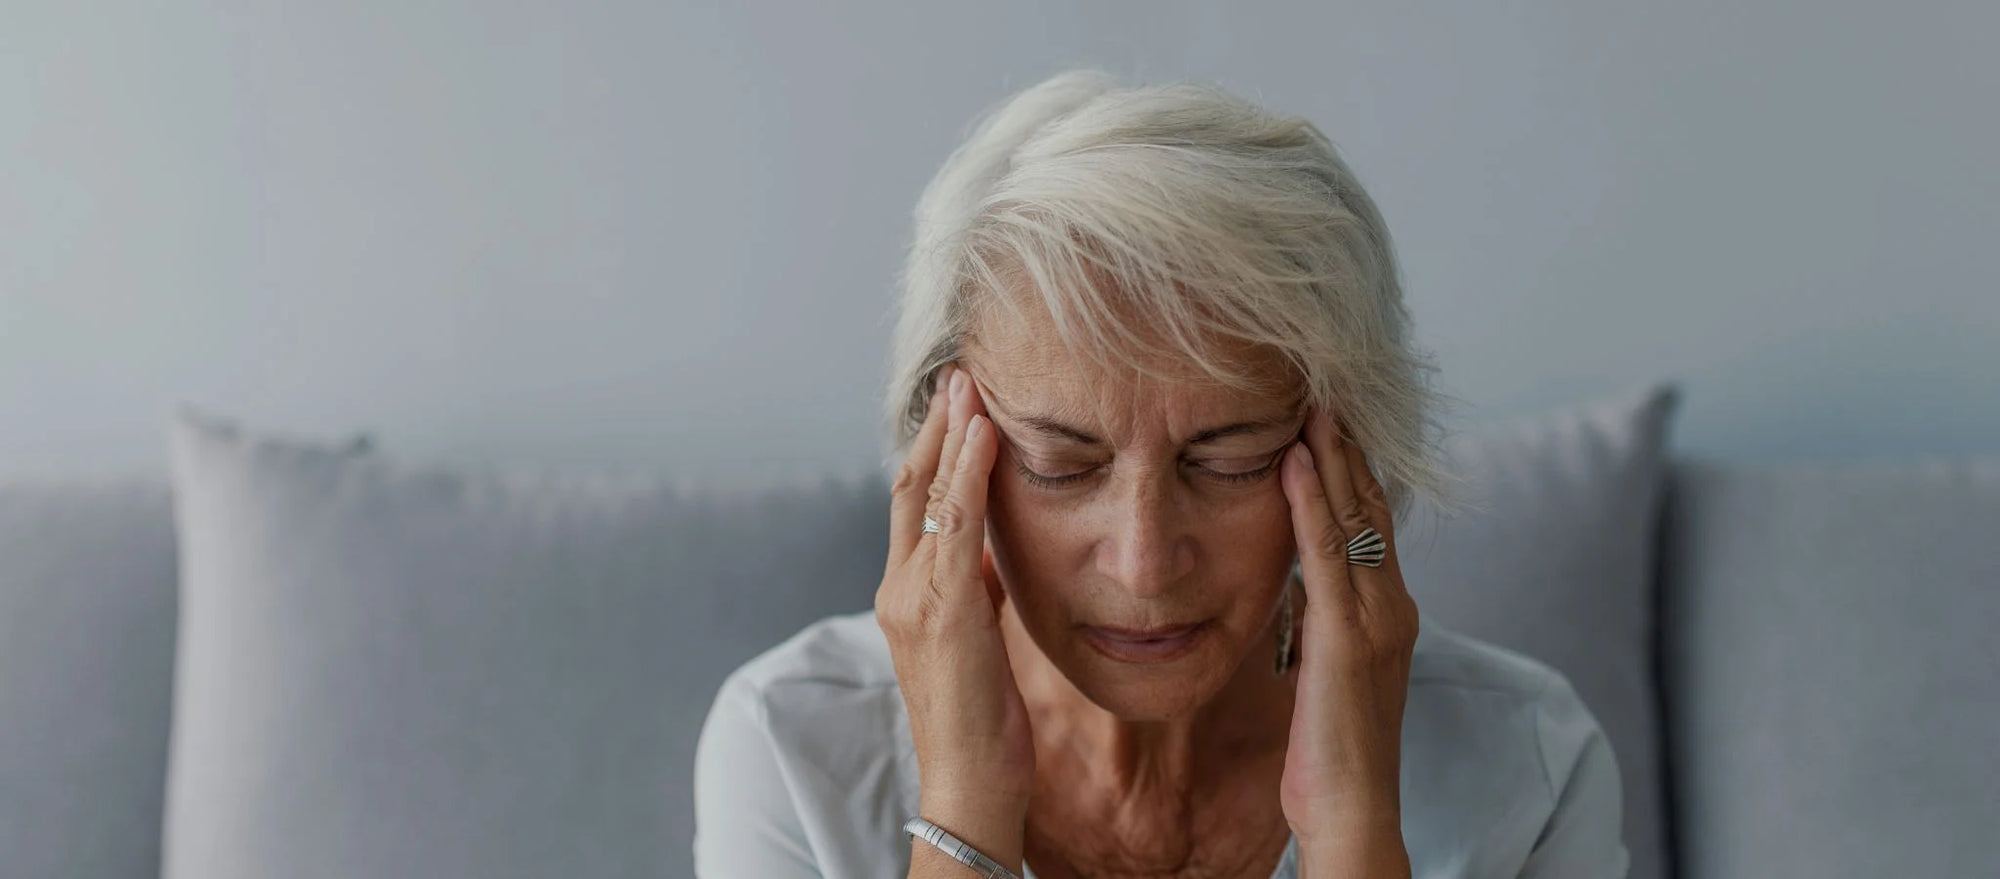 Image representing 'Top Strategies for Natural Headache Relief: Ease Your Pain.' The visual emphasizes comprehensive approaches and natural solutions for effective headache relief.